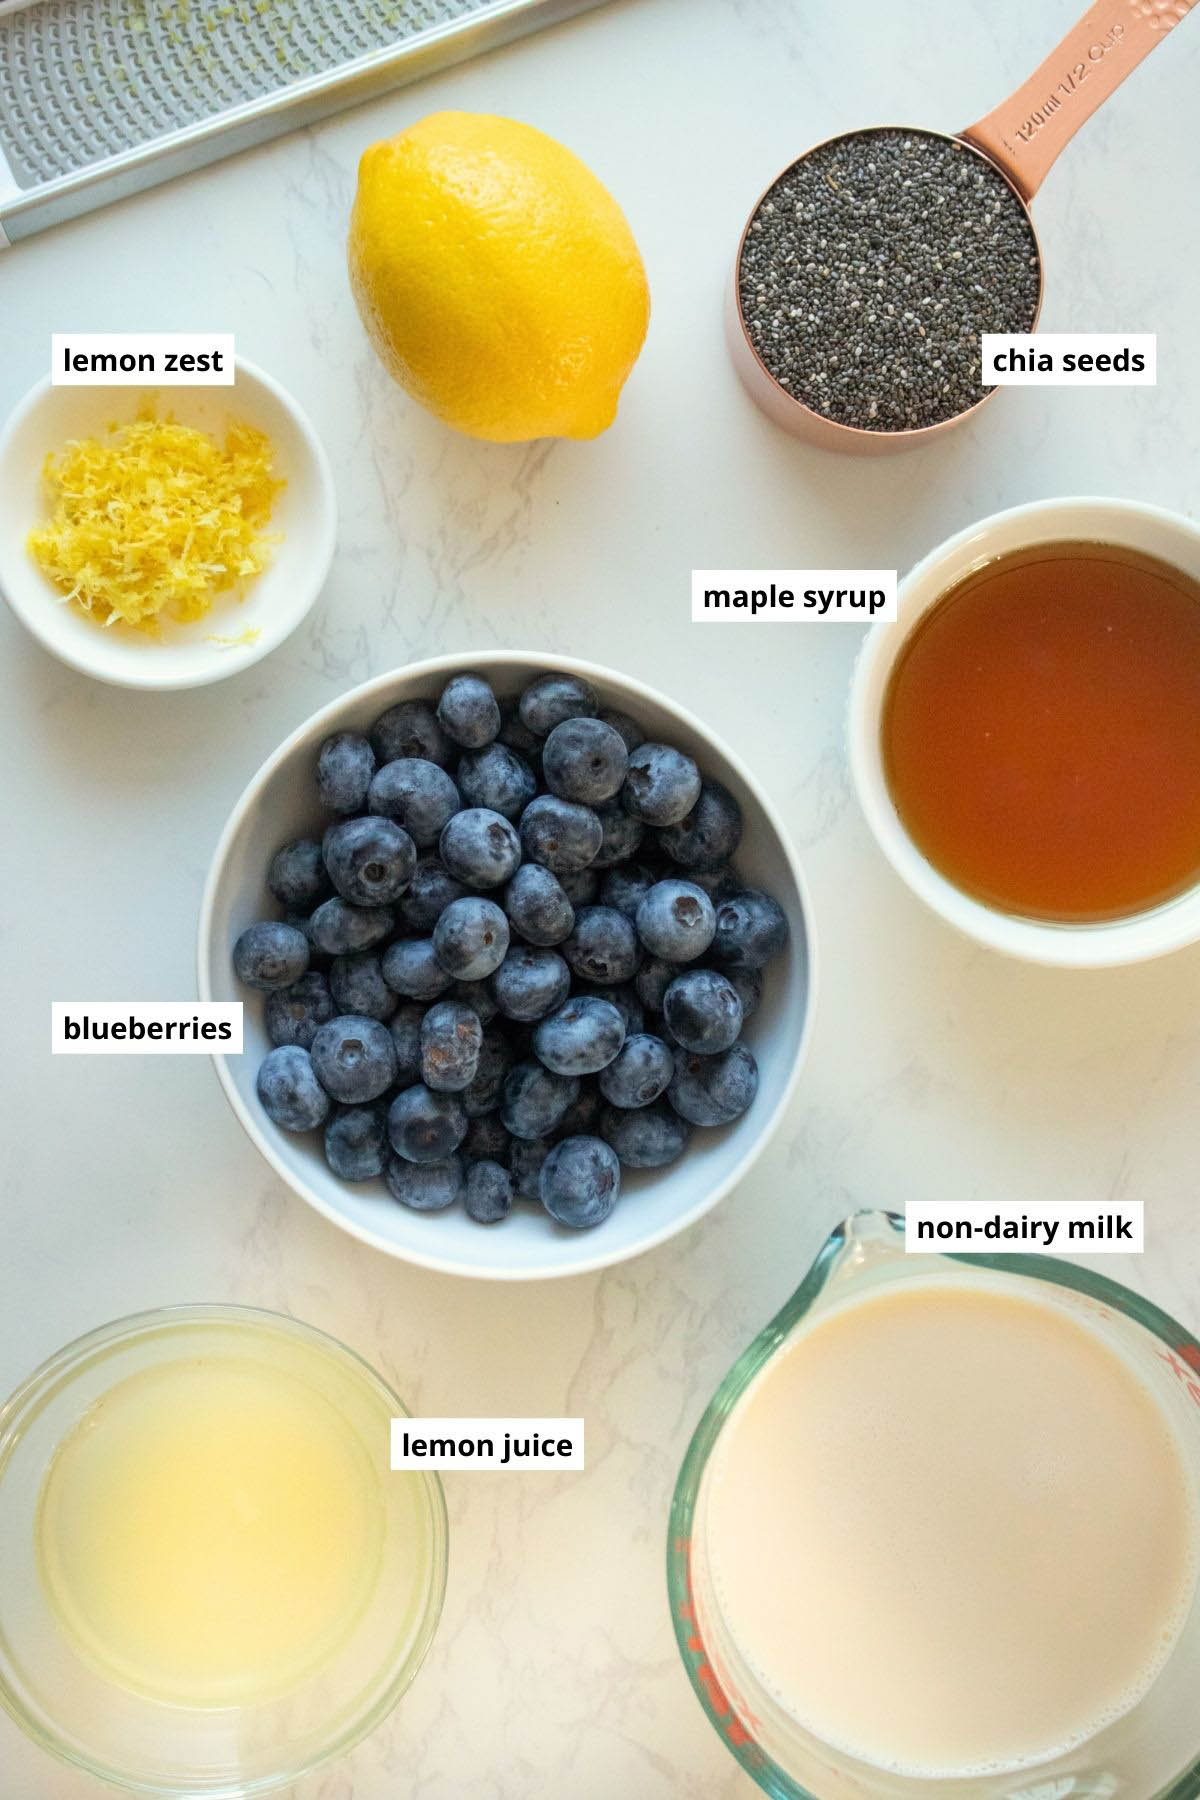 blueberries, lemon juice, lemon zest, chia seeds, non-dairy milk, and maple syrup in bowls on a white table